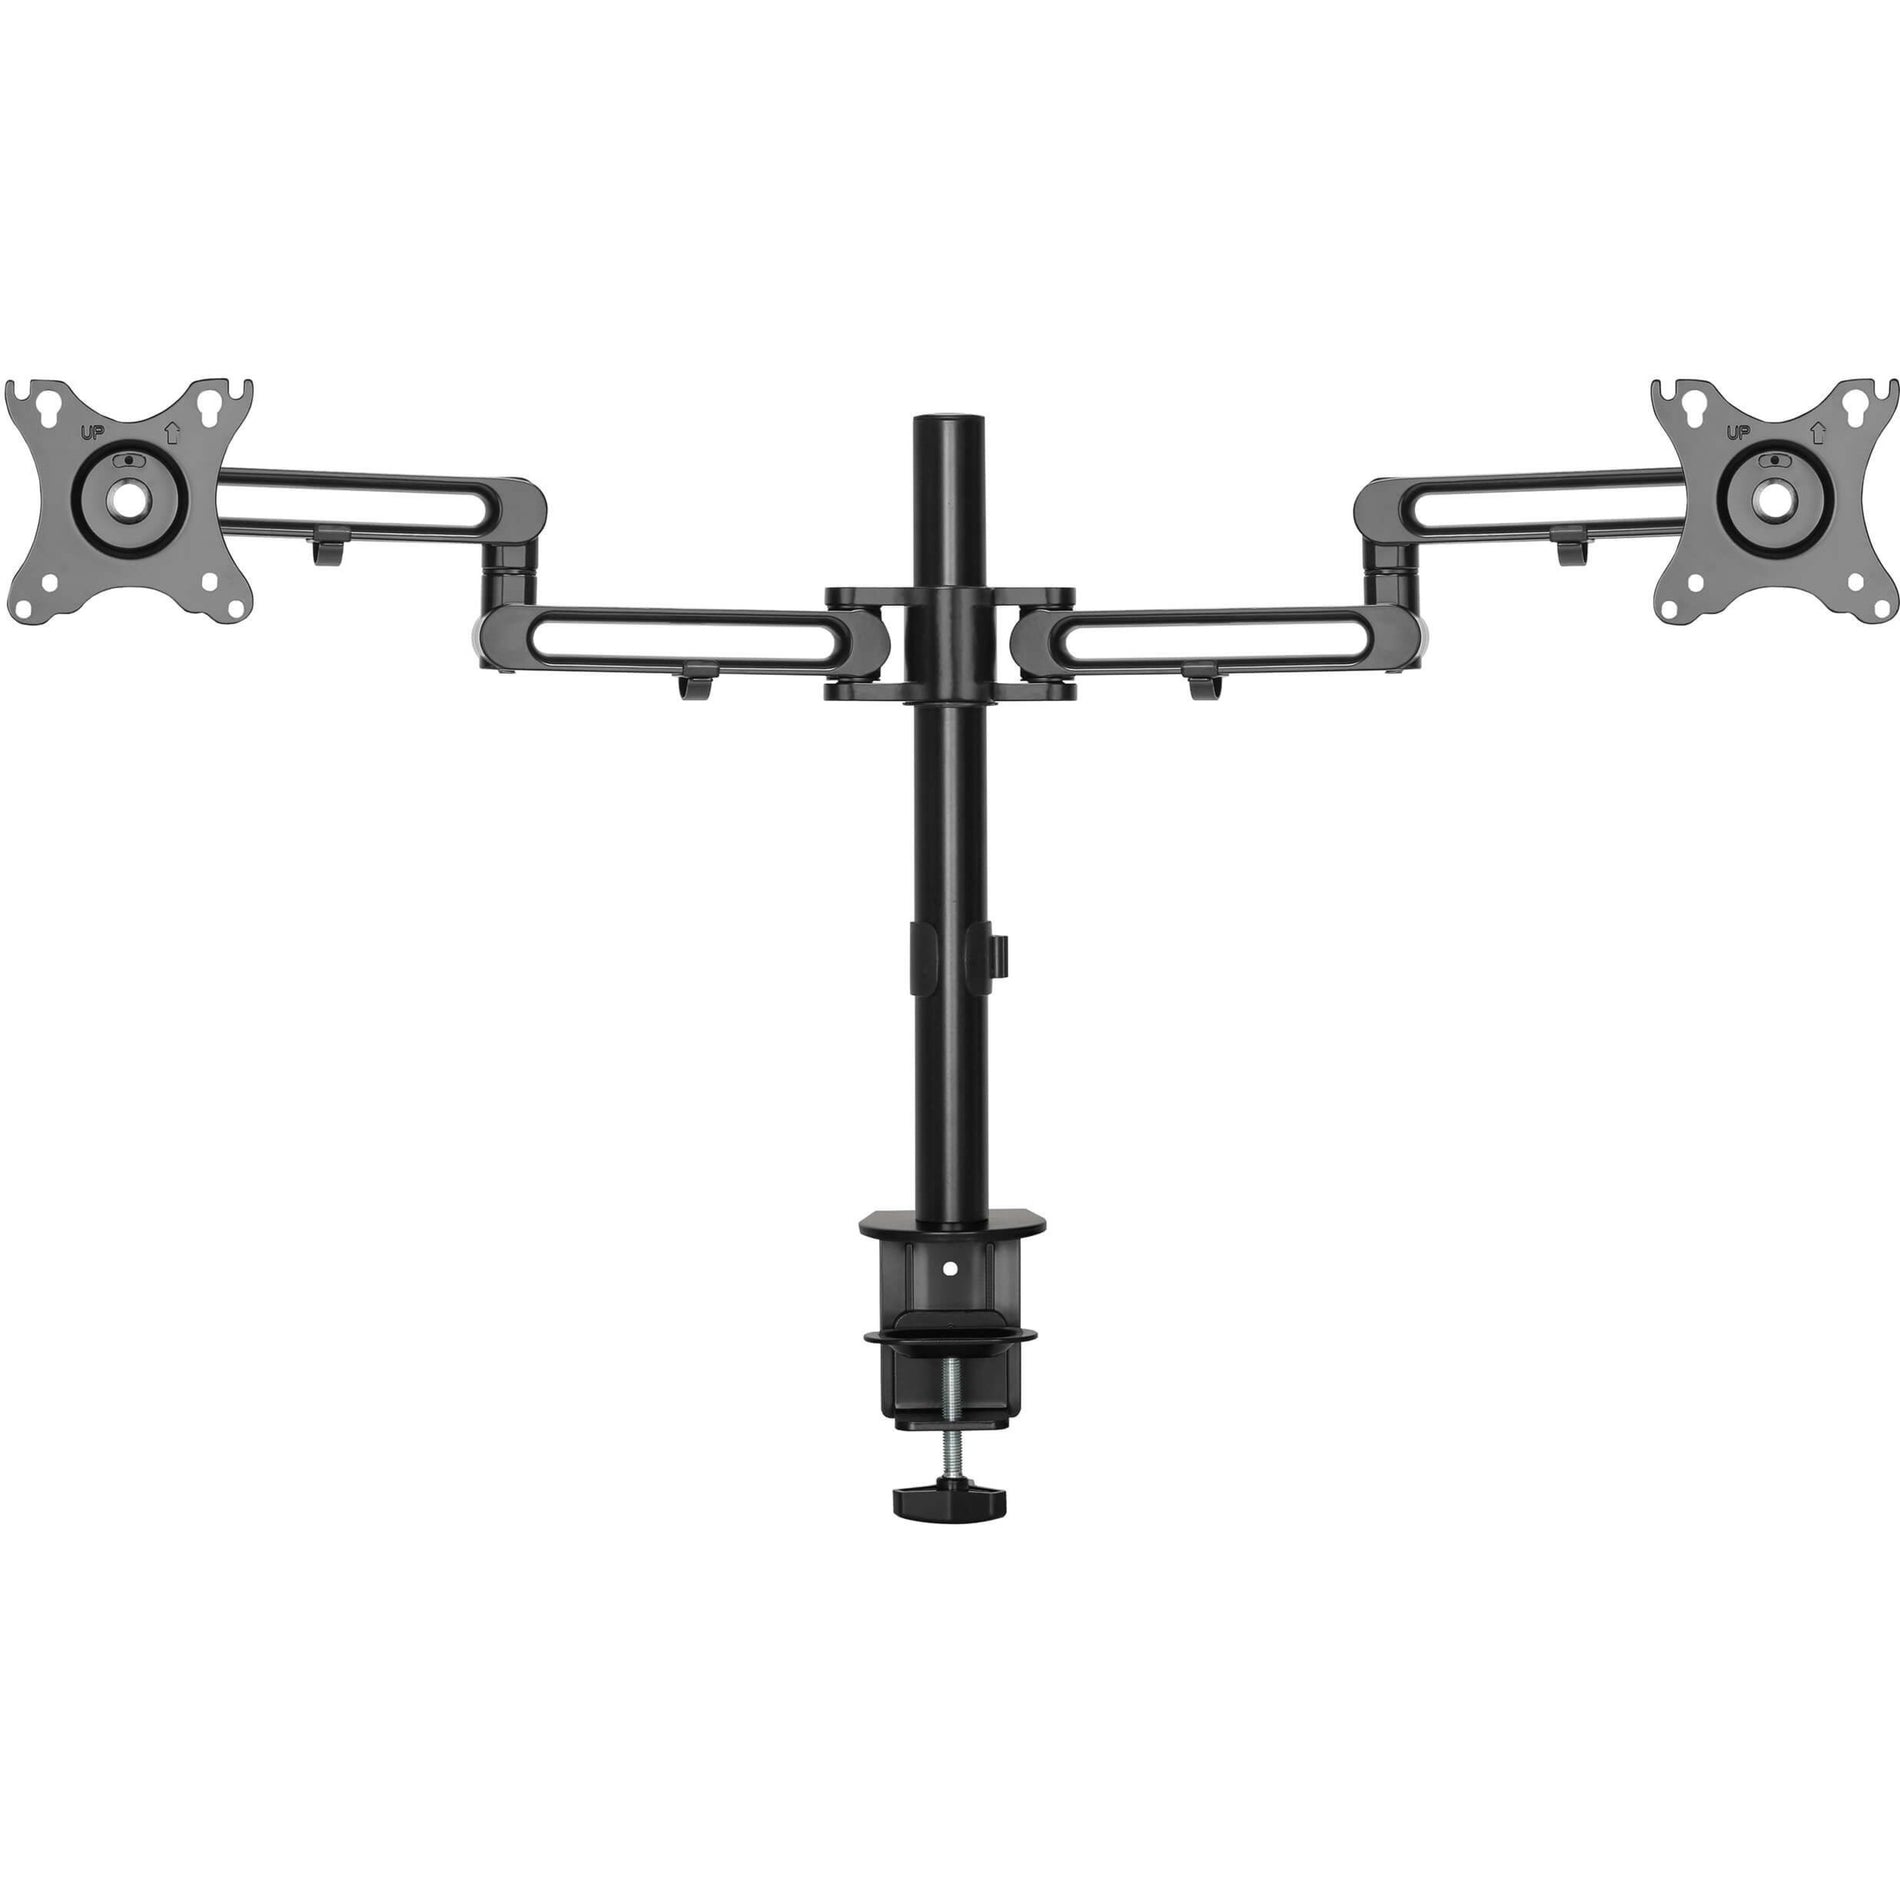 Tripp Lite DDR1327SDFC-1 Dual-Monitor Flex-Arm Desktop Clamp for 13" to 27" Displays, Reduced Glare, Cable Management, Swivel, Tilt, Rotate, Durable, Ergonomic